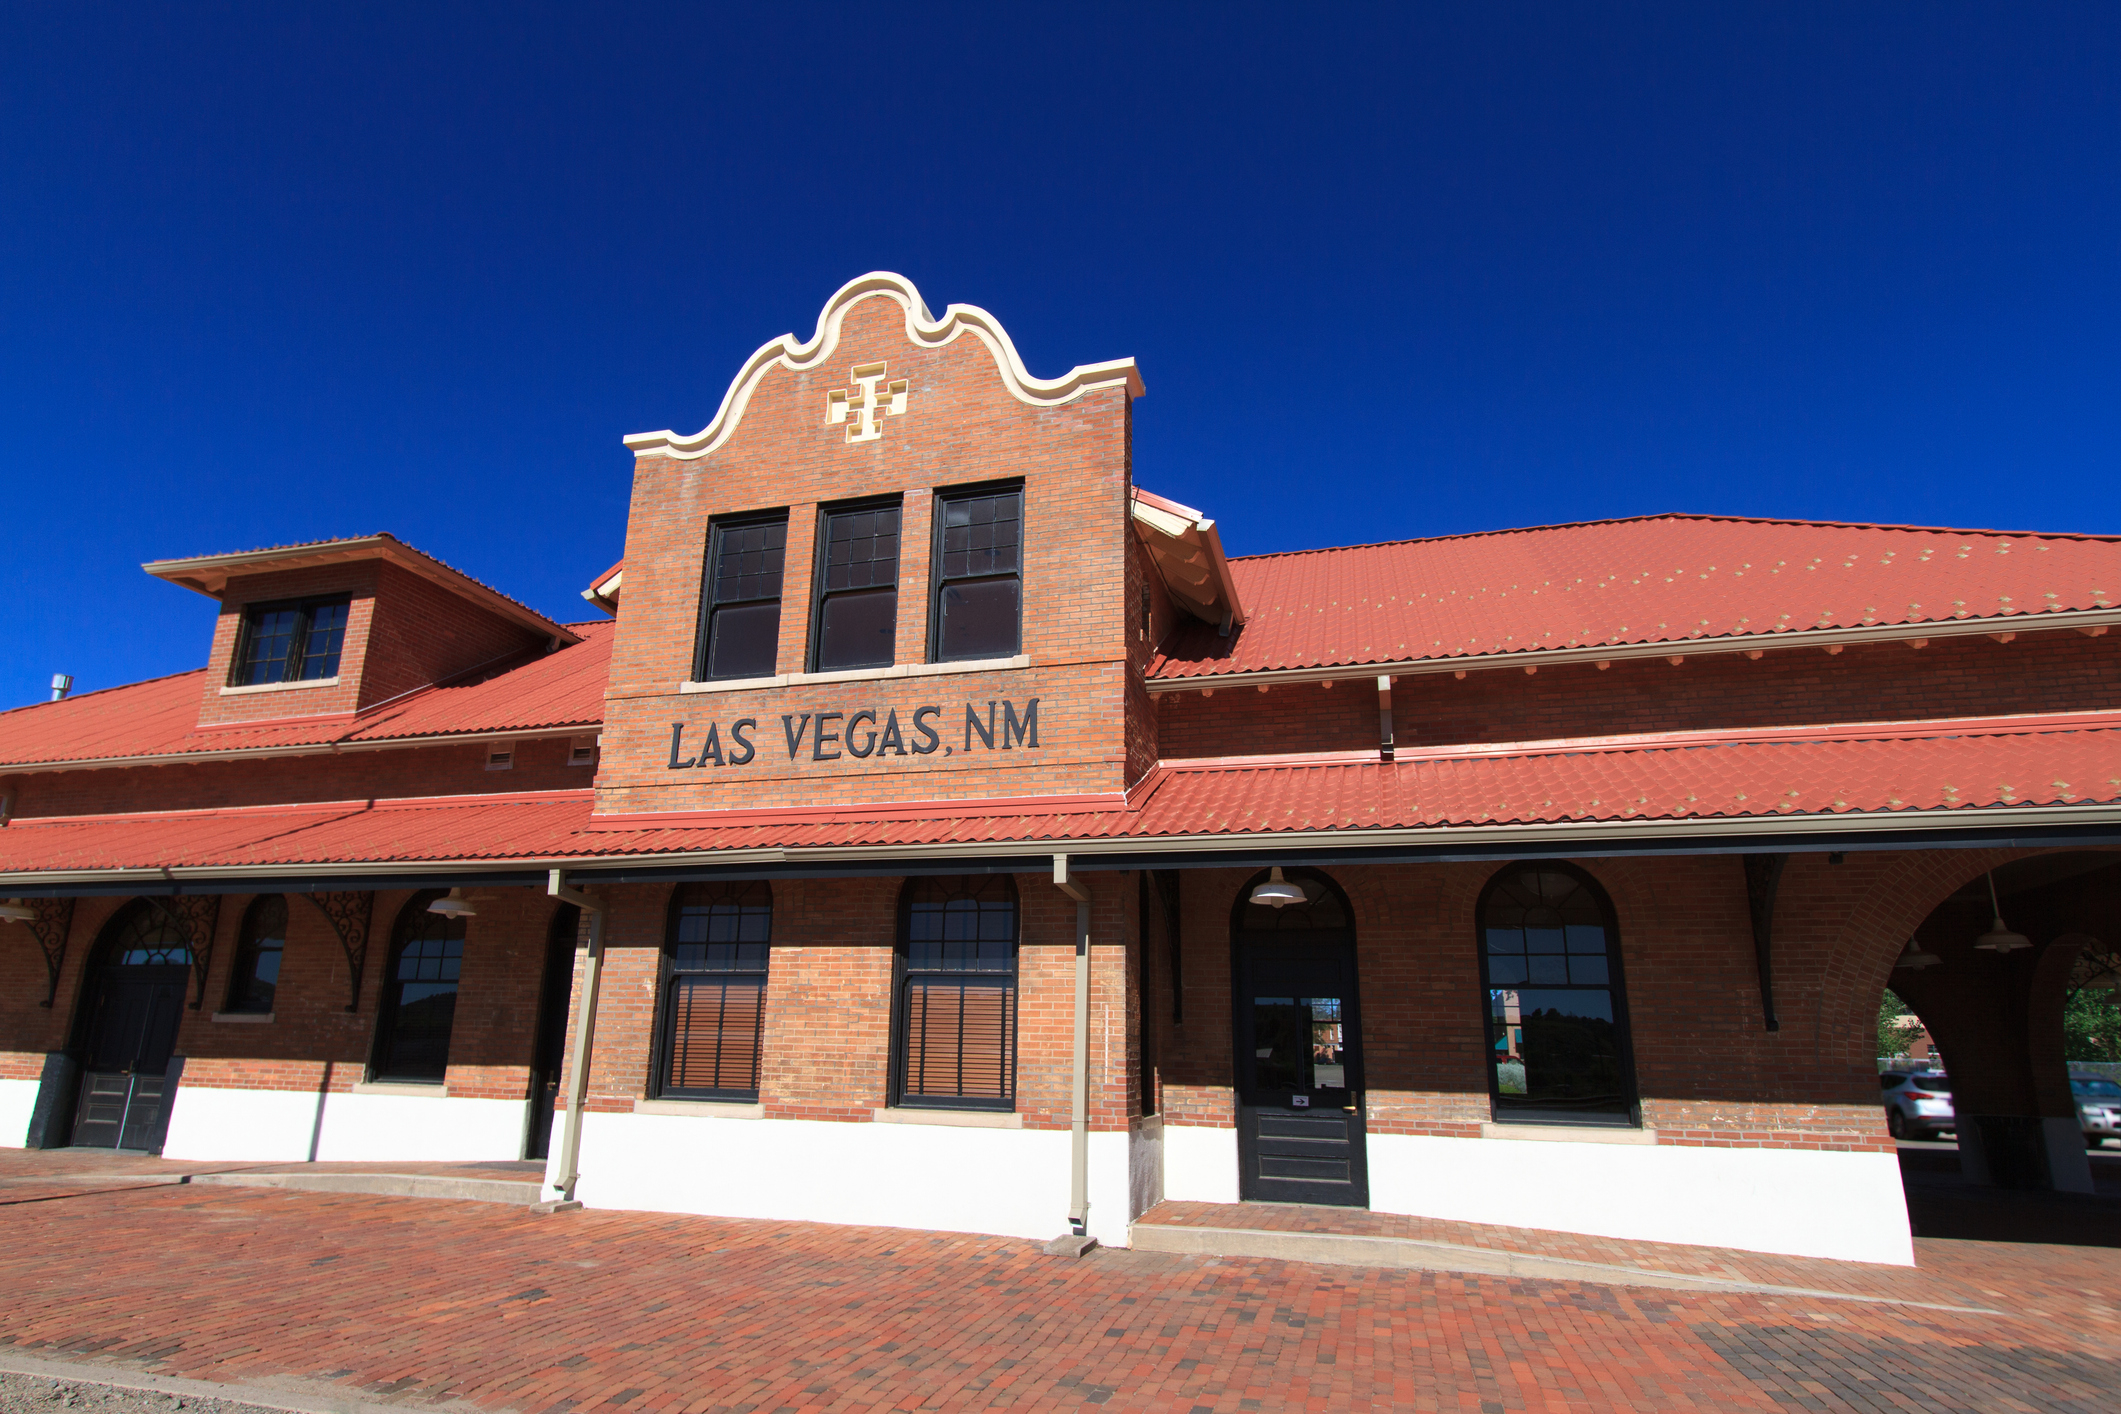 Historic train station building with &#x27;LAS VEGAS, N.M.&#x27; sign